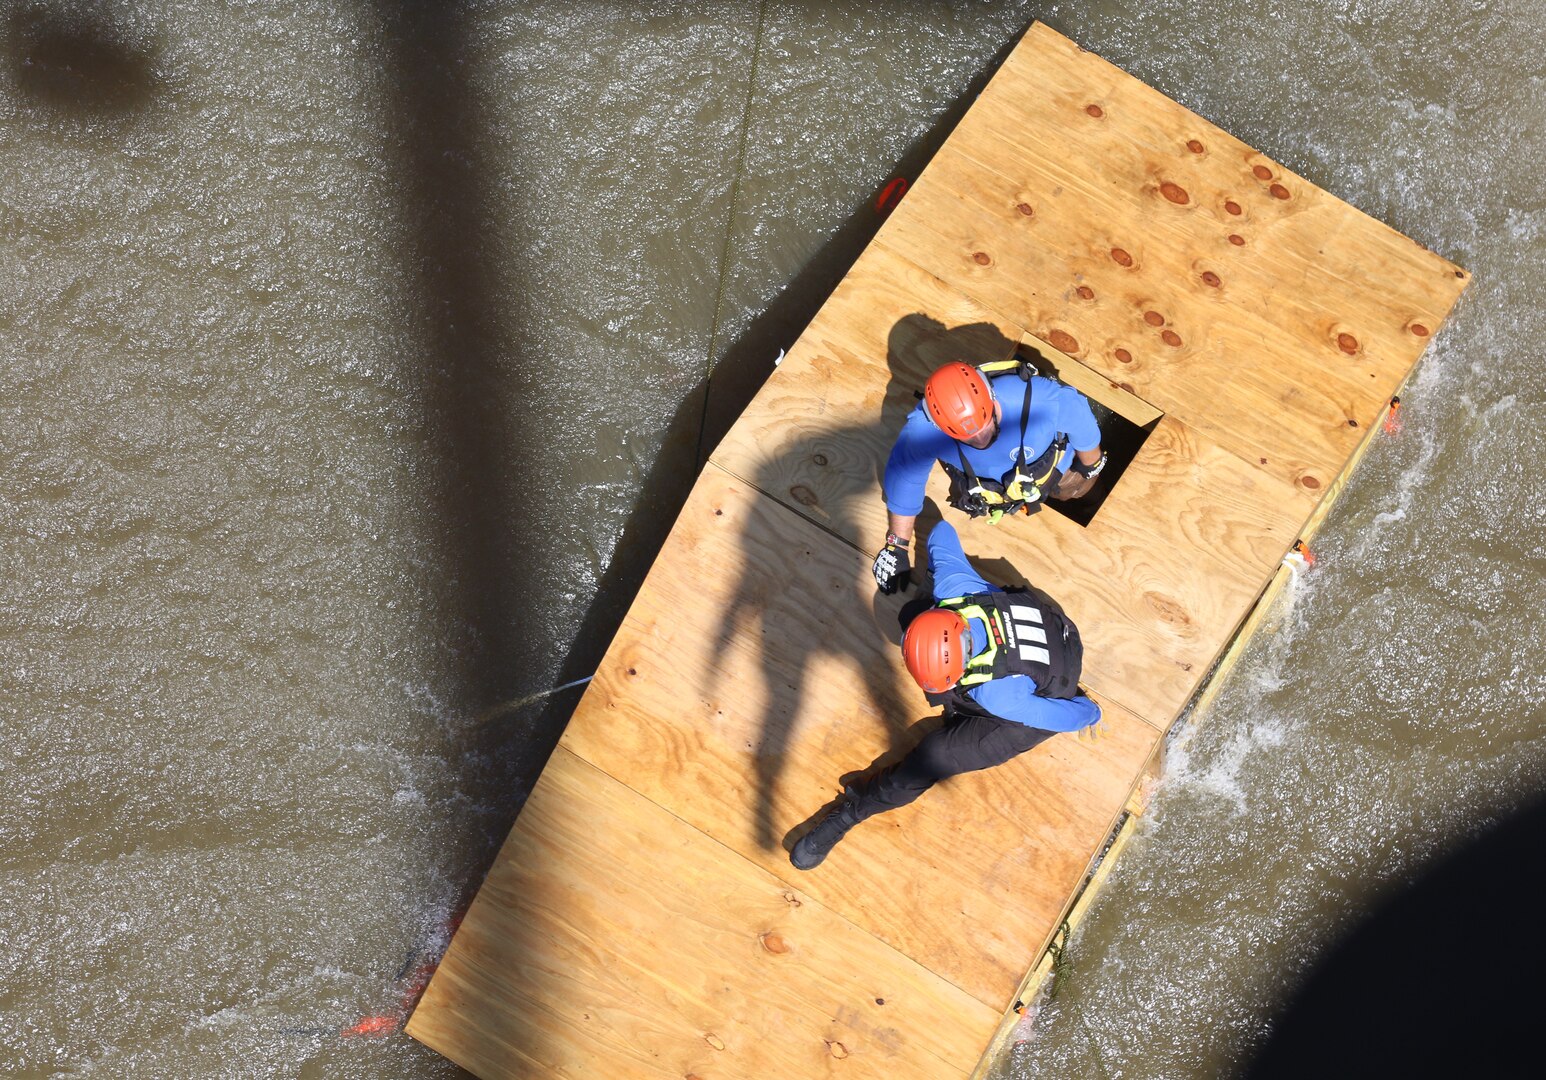 Members of the Mississippi Task Force Urban Search and Rescue team train for rooftop rescue May 31, 2019, at Camp McCain, Mississippi. The training was part of Ardent Sentry 2019, a North American Aerospace Defense Command and US Northern Command joint force exercise to test the Mississippi National Guard’s response to a 7.7 Magnitude Earthquake along the New Madrid Fault Line near Memphis, Tennessee. (U.S. Army National Guard photo by PFC Austin Eldridge/RELEASED)